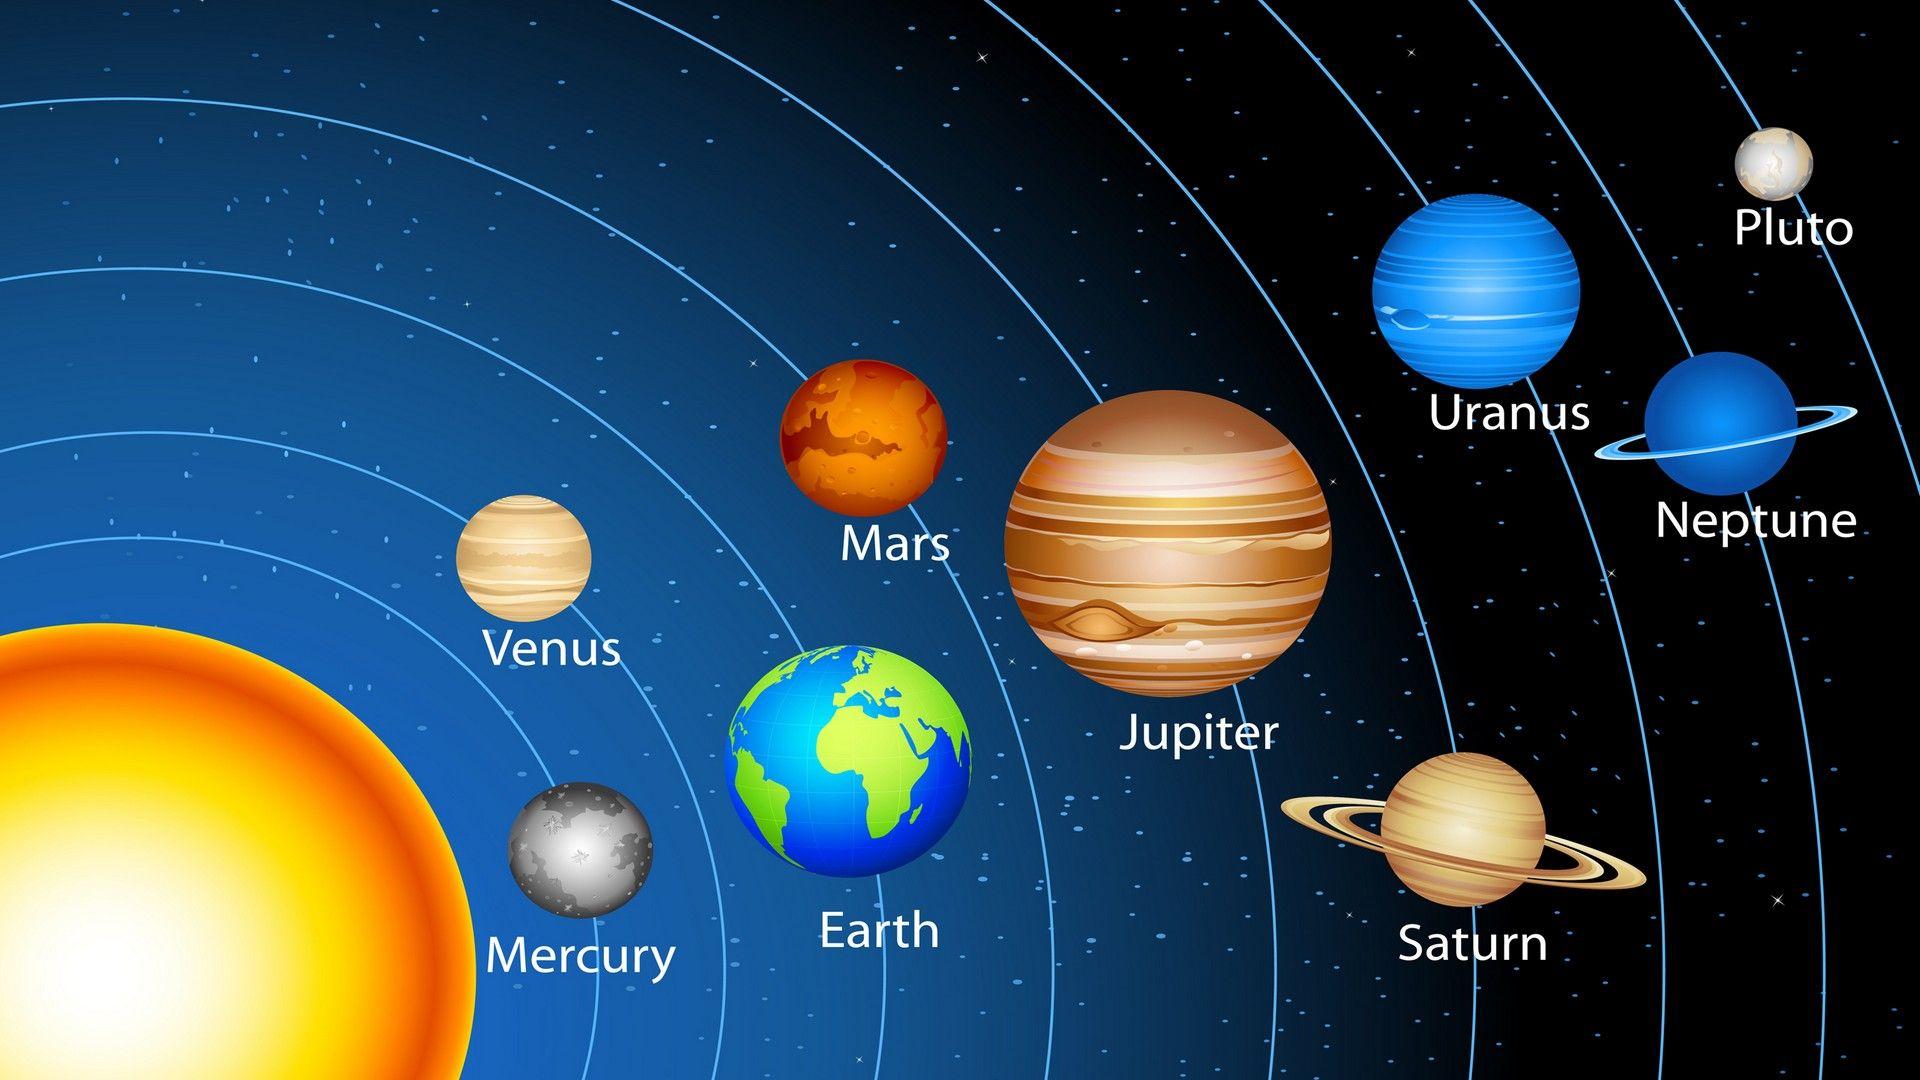 Solar System Planets Wallpapers Top Free Solar System Planets